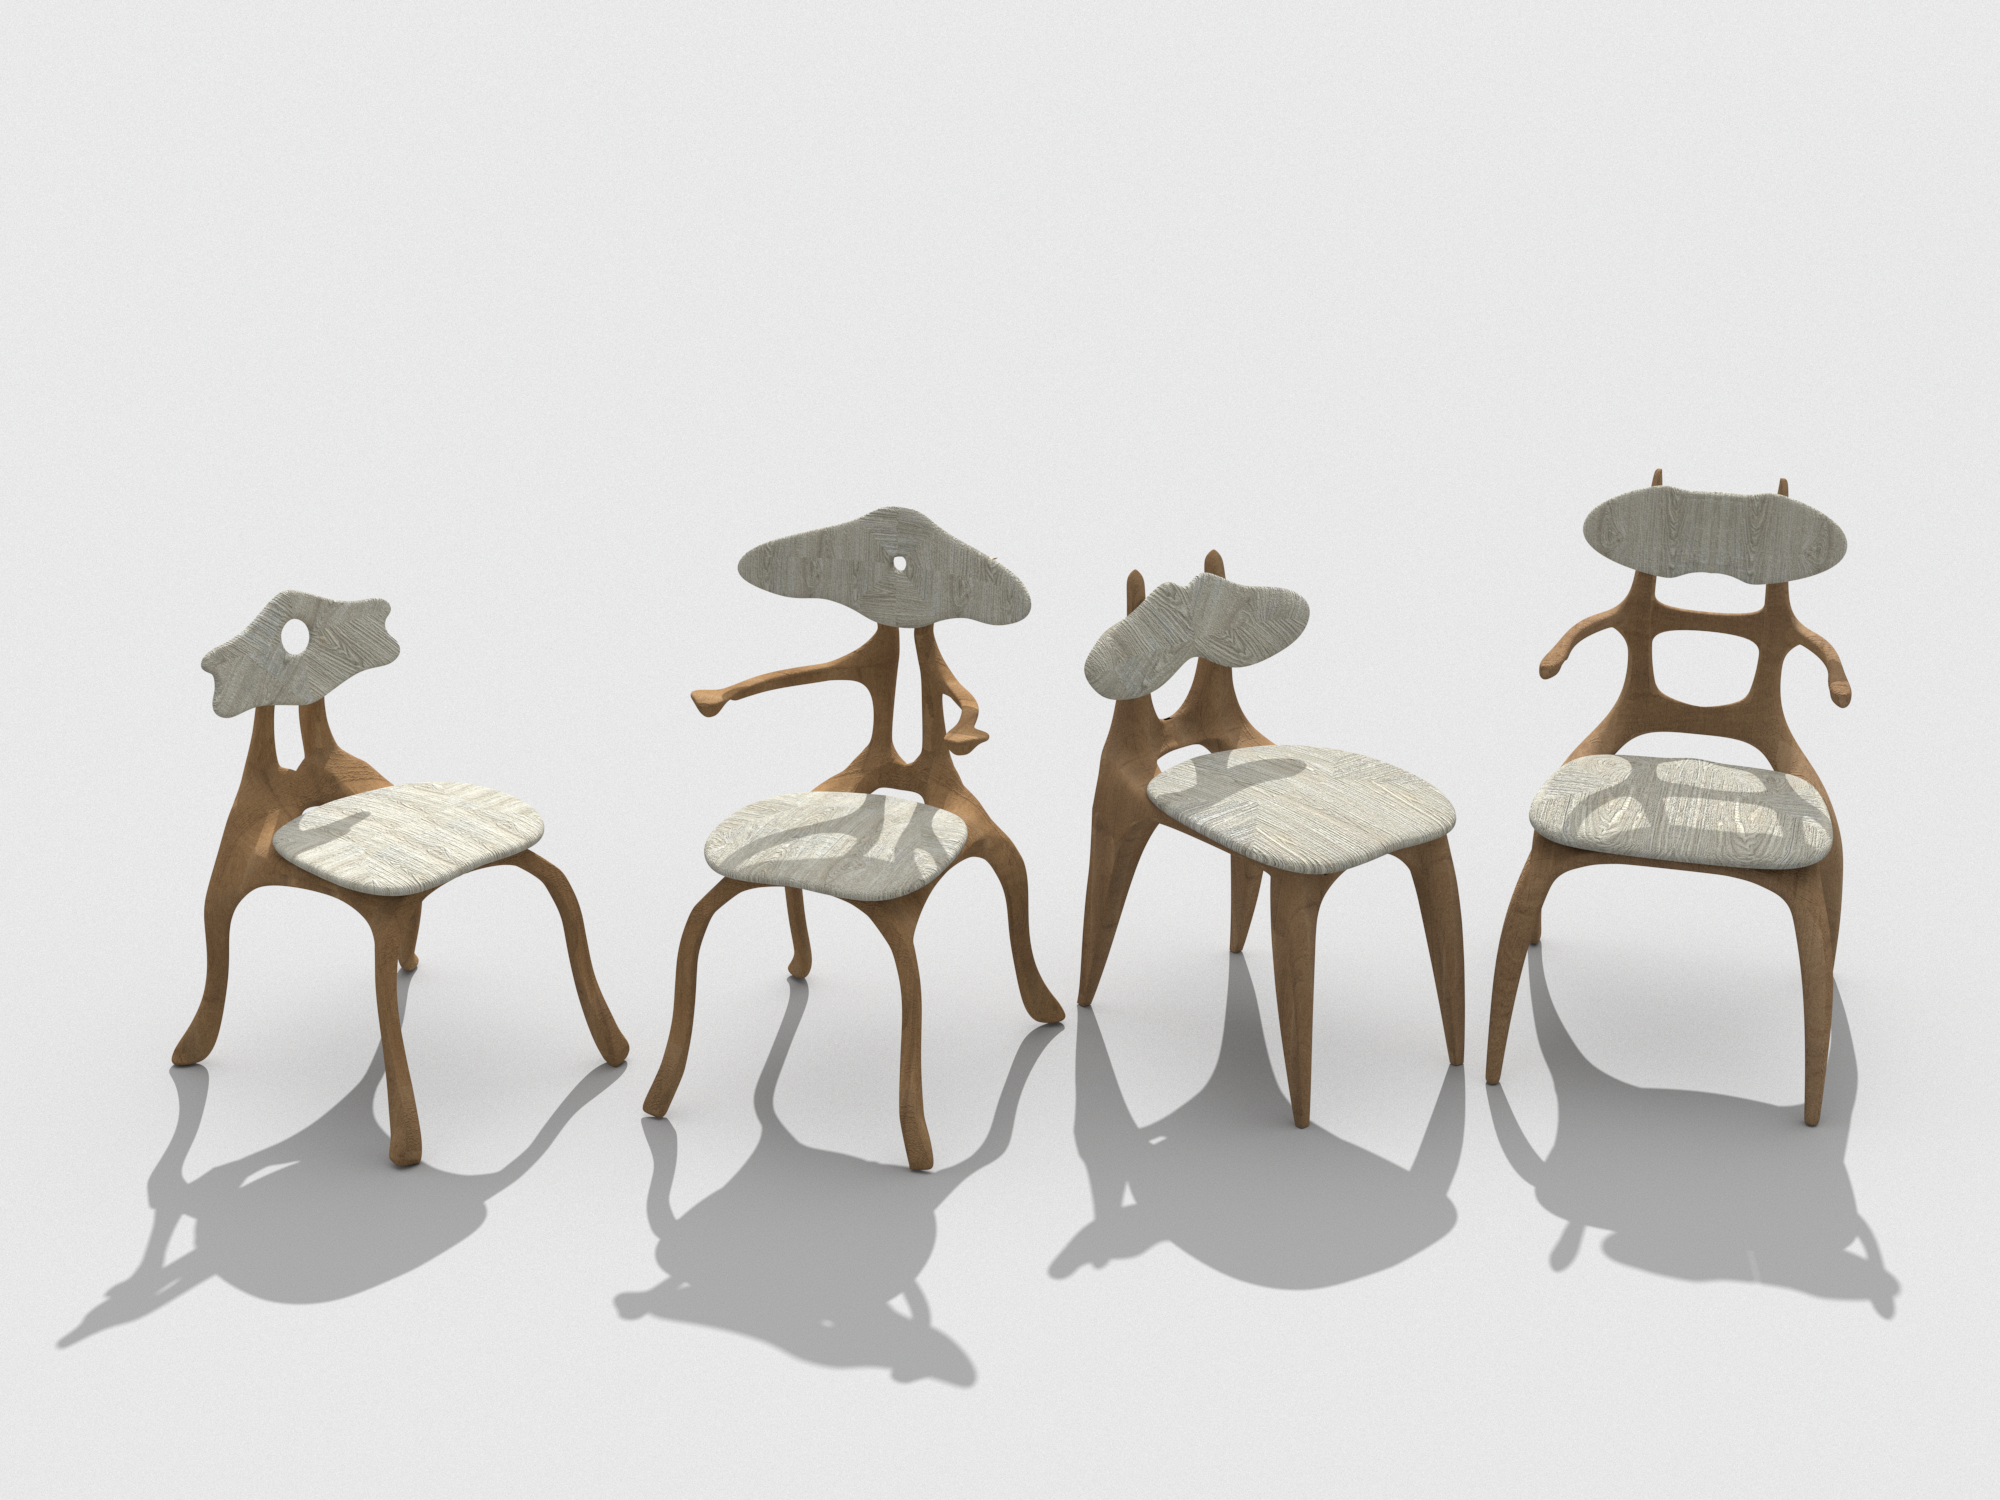 Chairs-in-one-scene---Website-Format.png